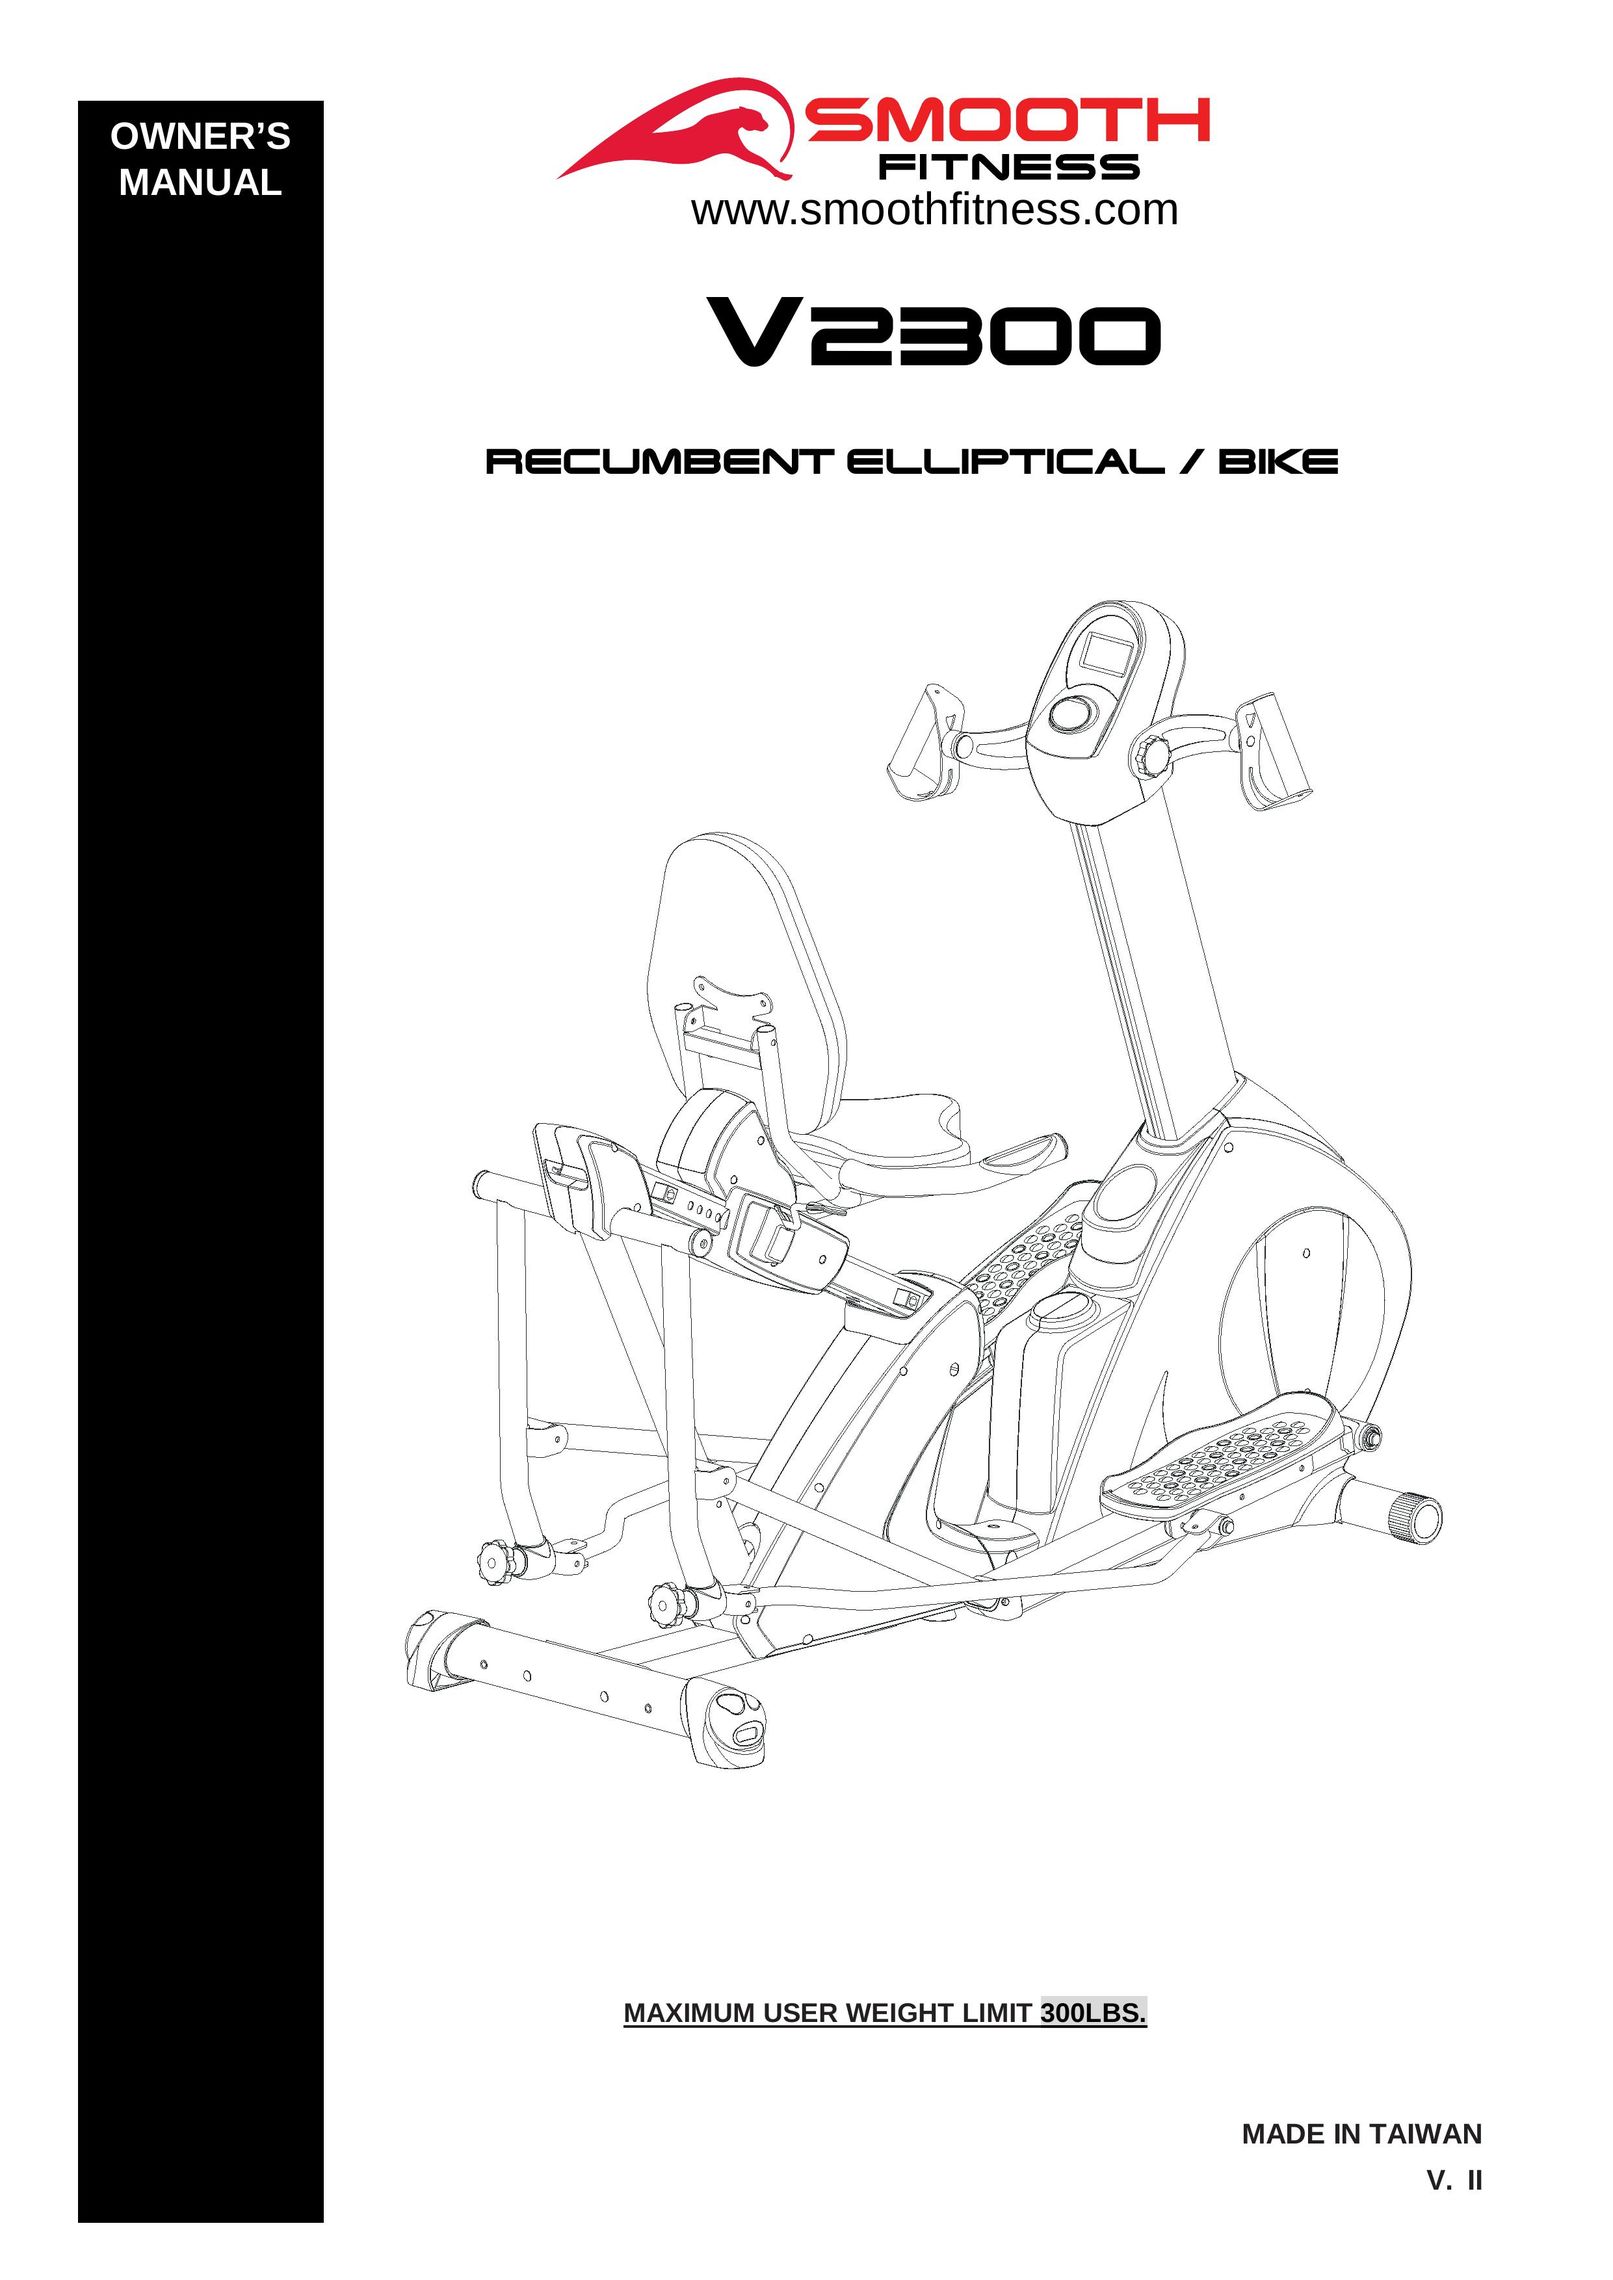 Smooth Fitness V2300 Bicycle User Manual